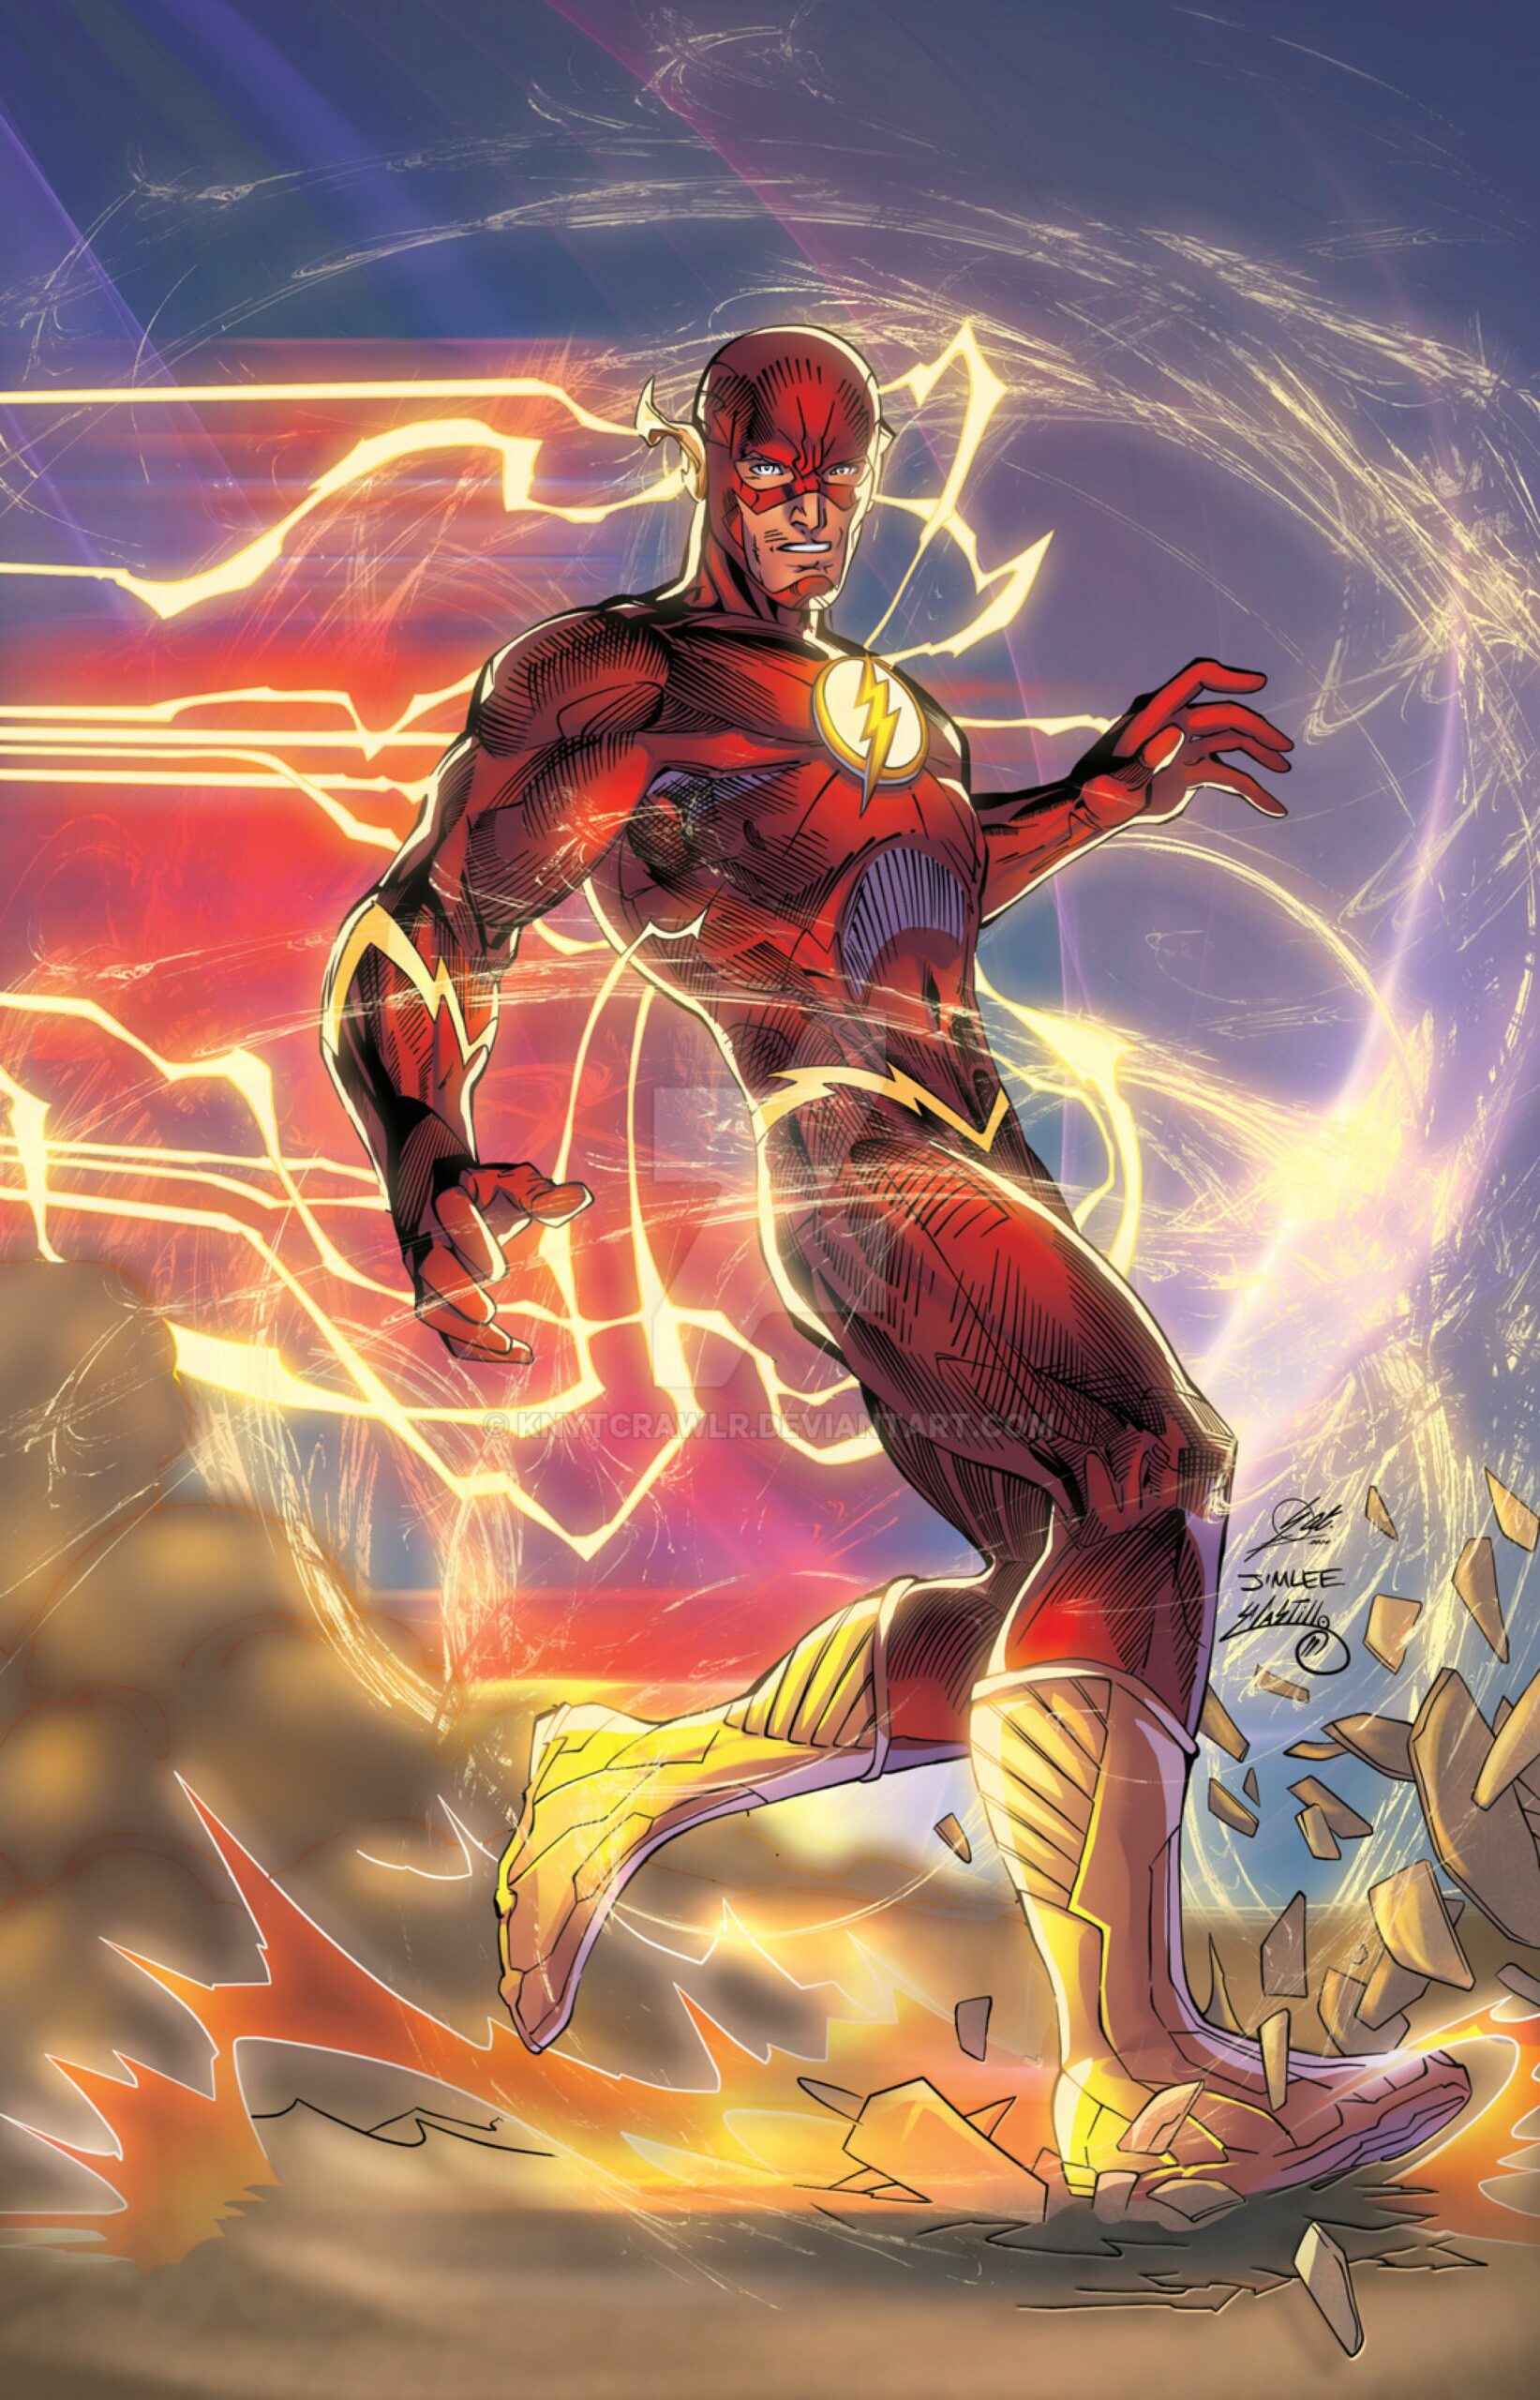 Flash Art By Jim Lee Poster - The Comic Book Store